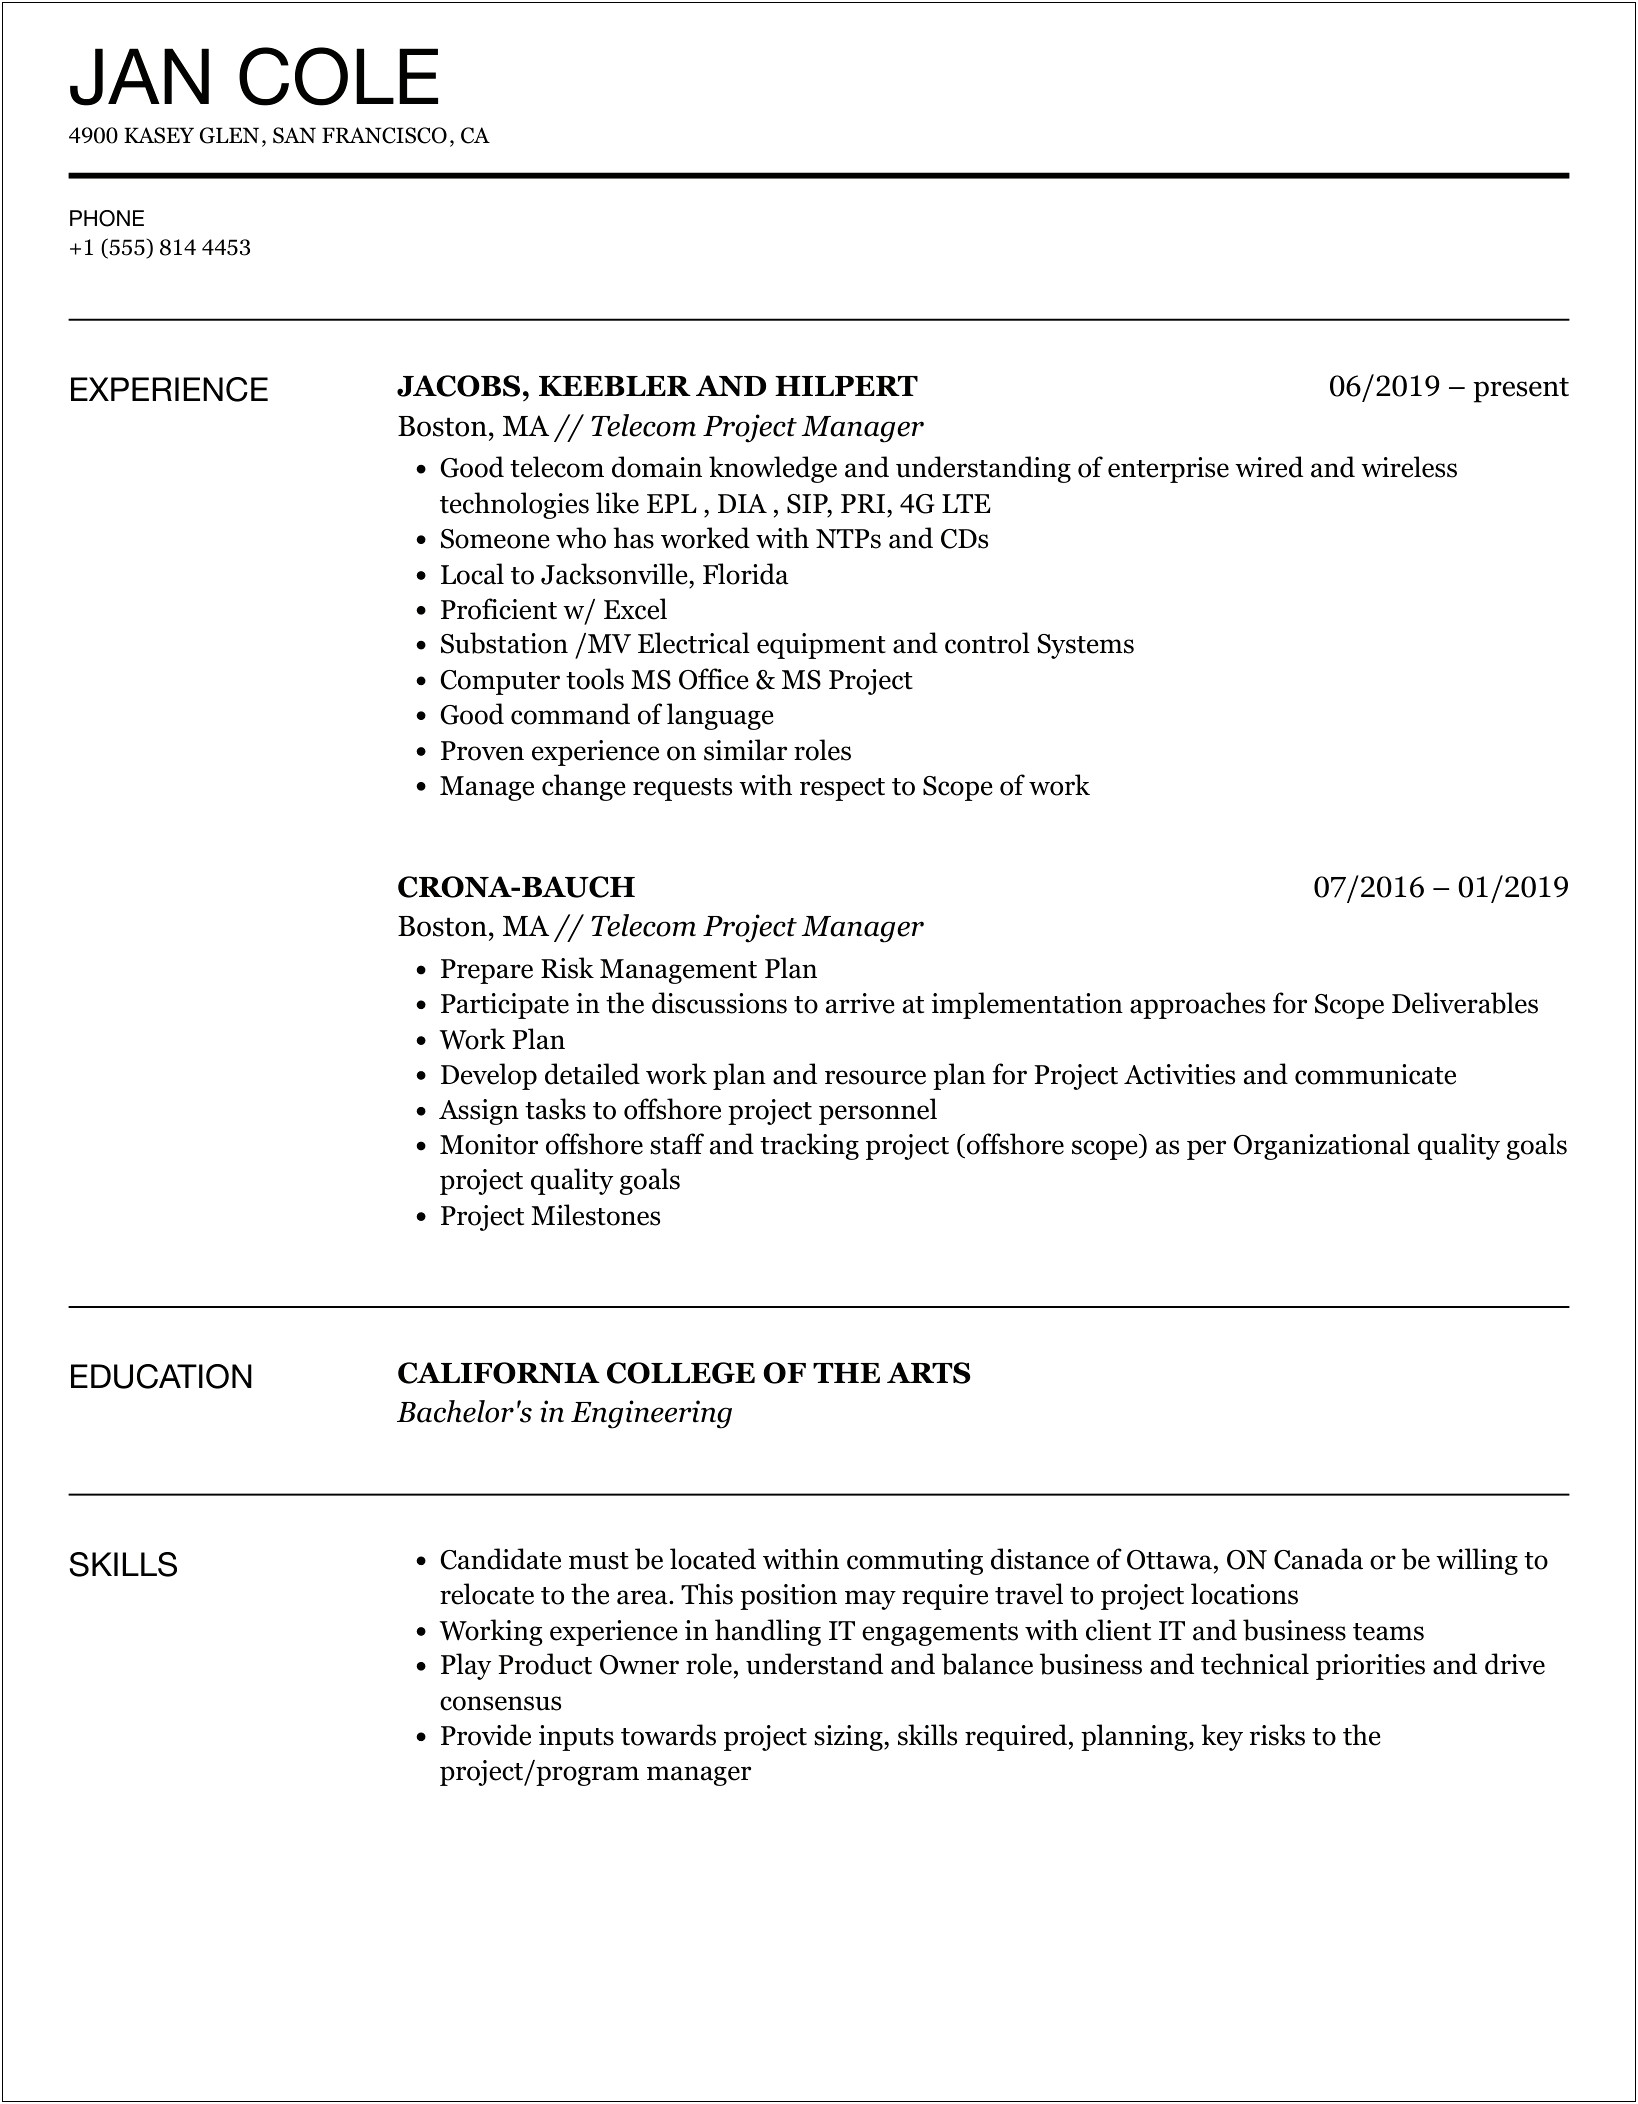 Telecom Project Manager Resume Sample India